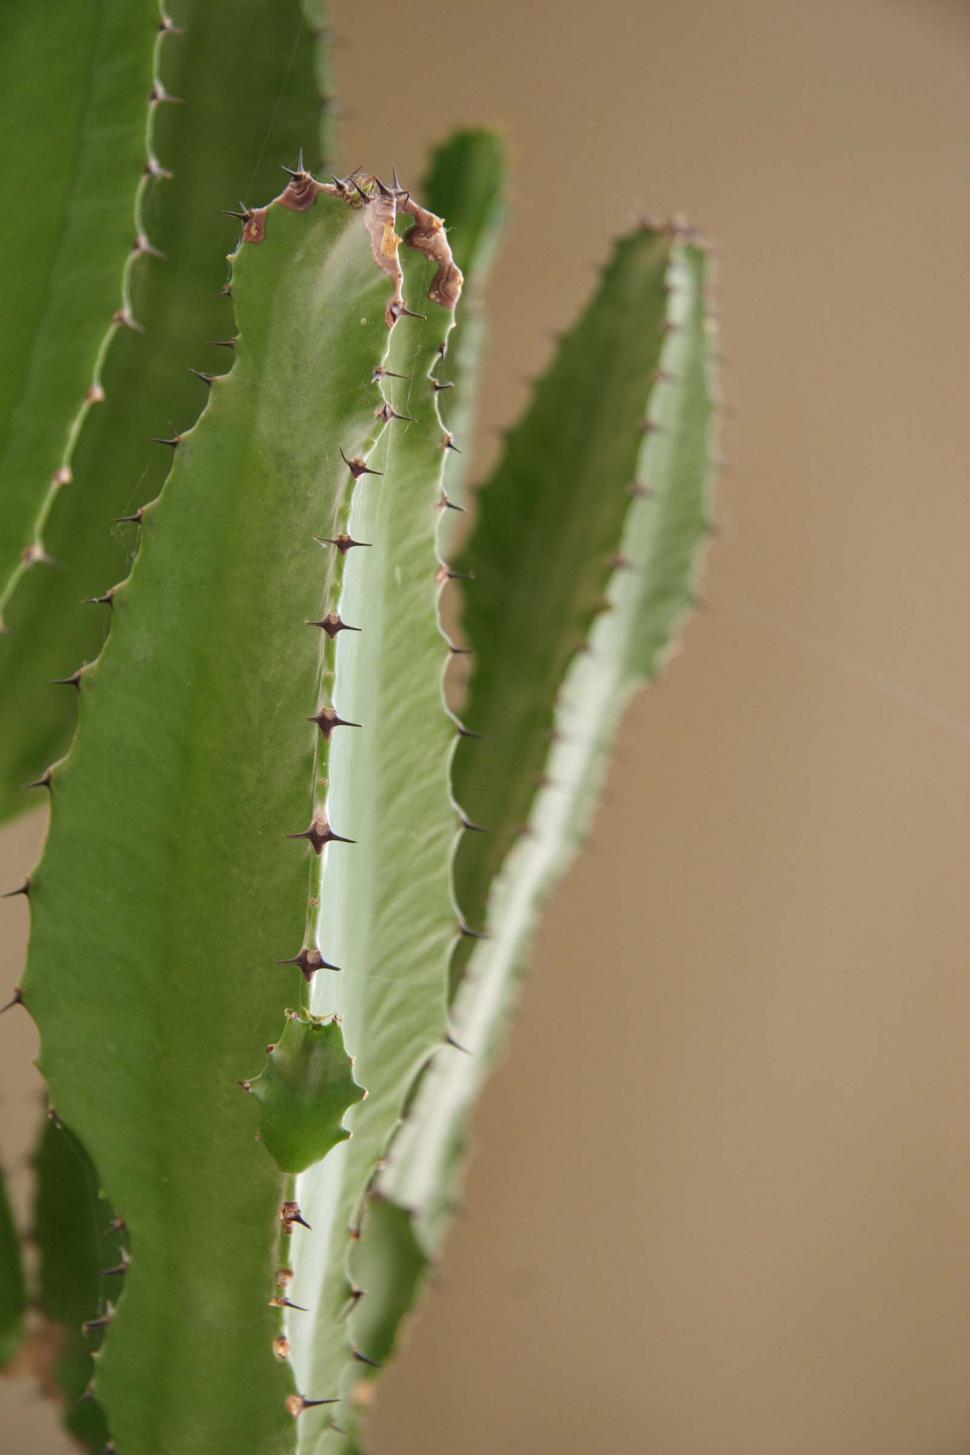 Free Image of Thorns on an indoor cactus 